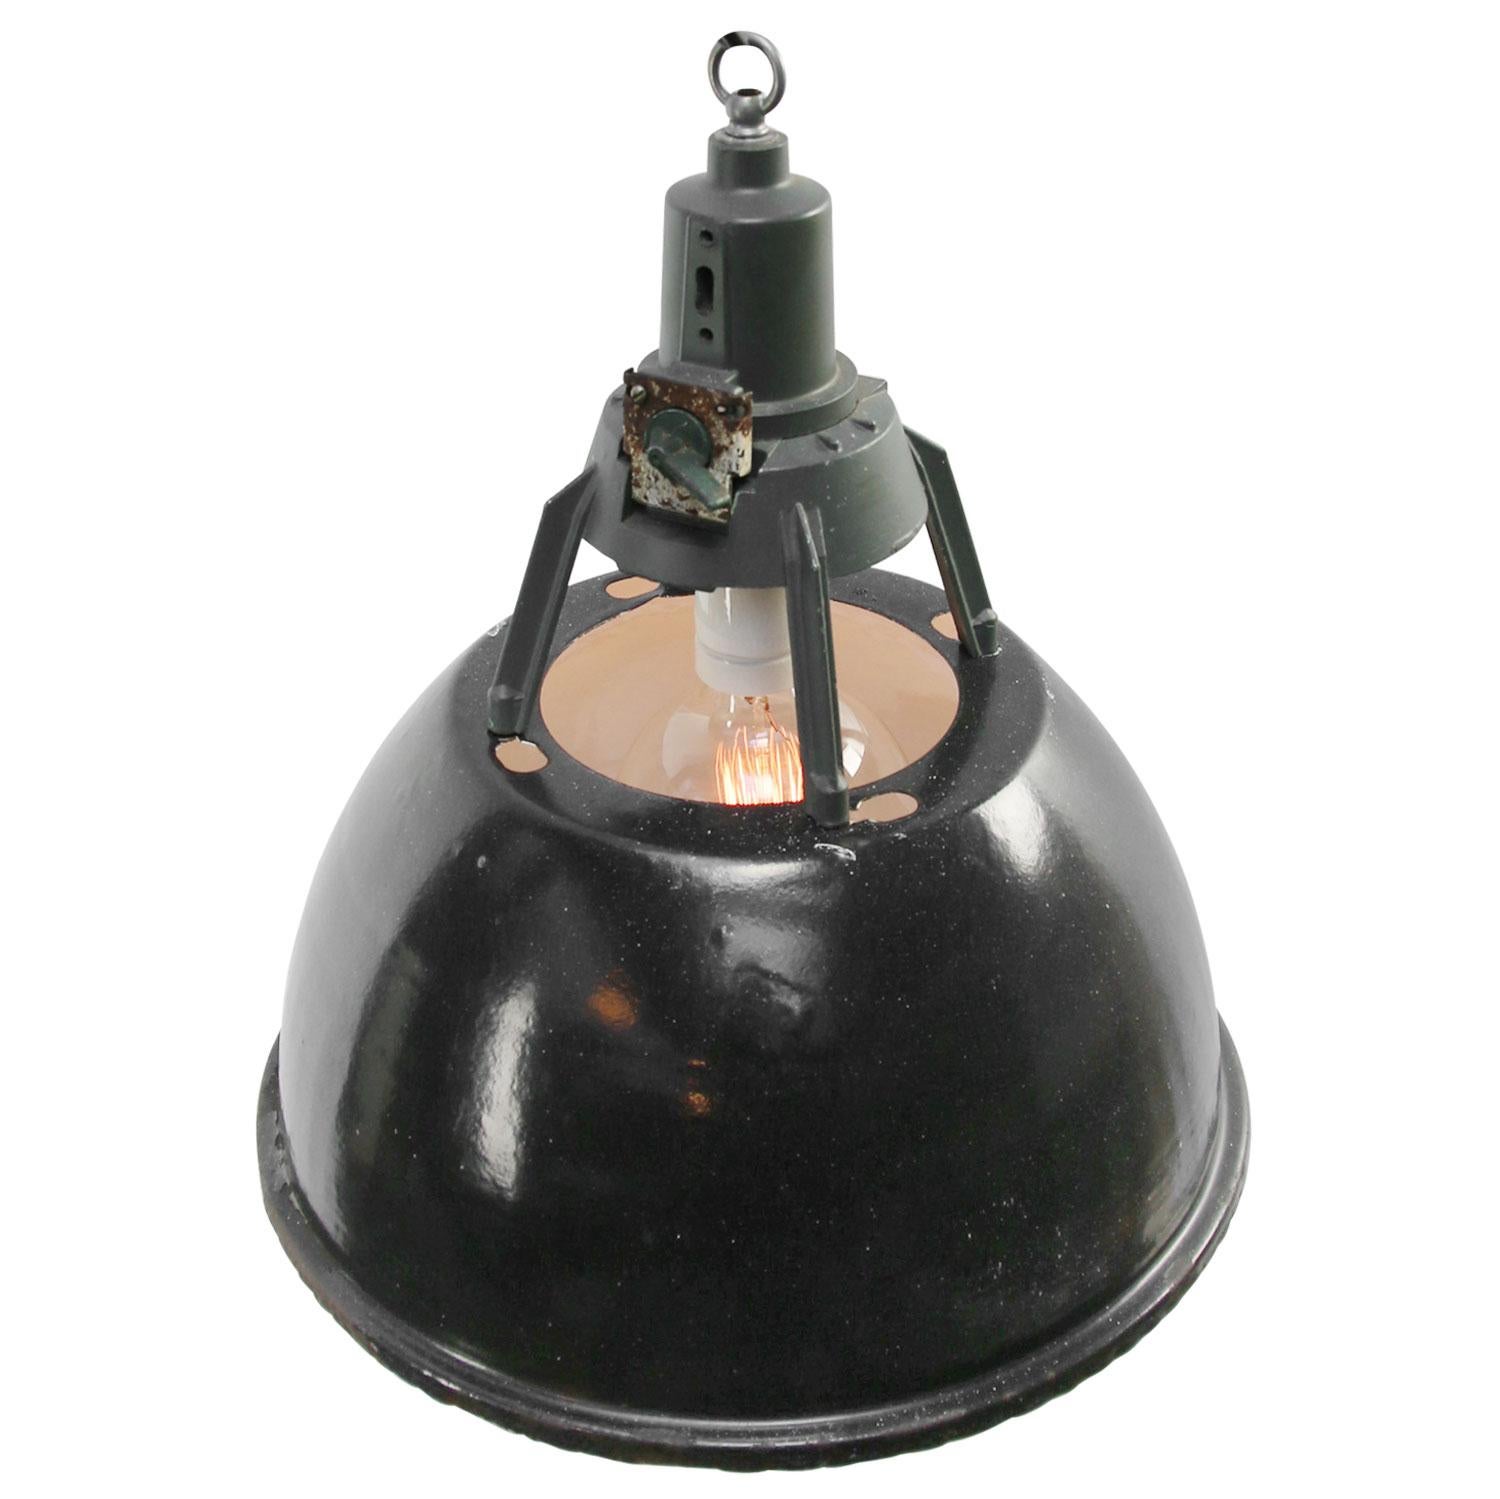 Enamel Industrial pendant.
Black enamel shade, white inside.
Dark gray cast aluminum top.

Weight: 2.90 kg / 6.4 lb

Priced per individual item. All lamps have been made suitable by international standards for incandescent light bulbs,